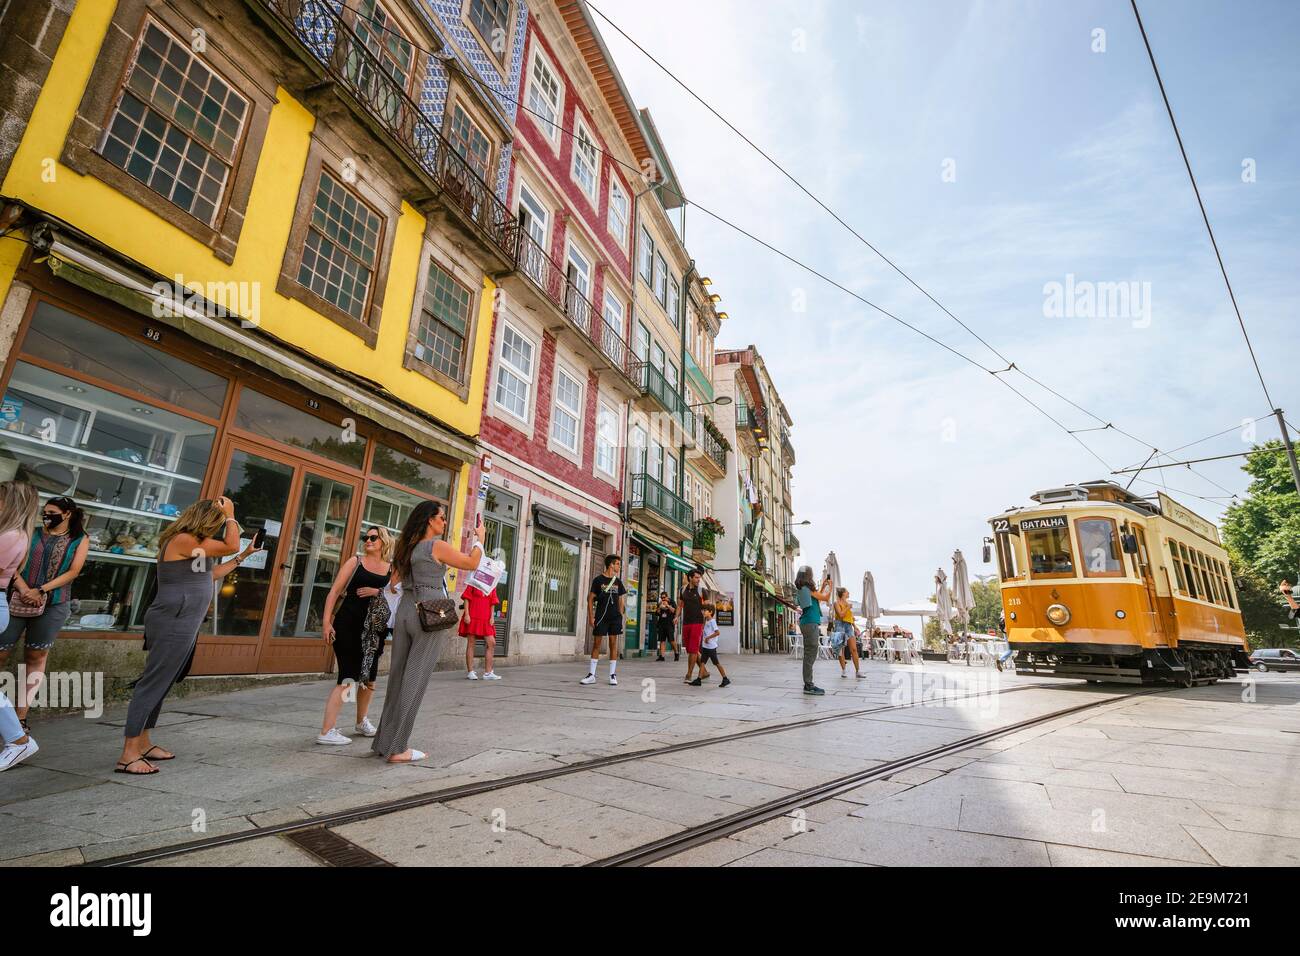 Porto, Portugal - August 11, 2020: Tourists taking photographs of approaching vintage tram Stock Photo